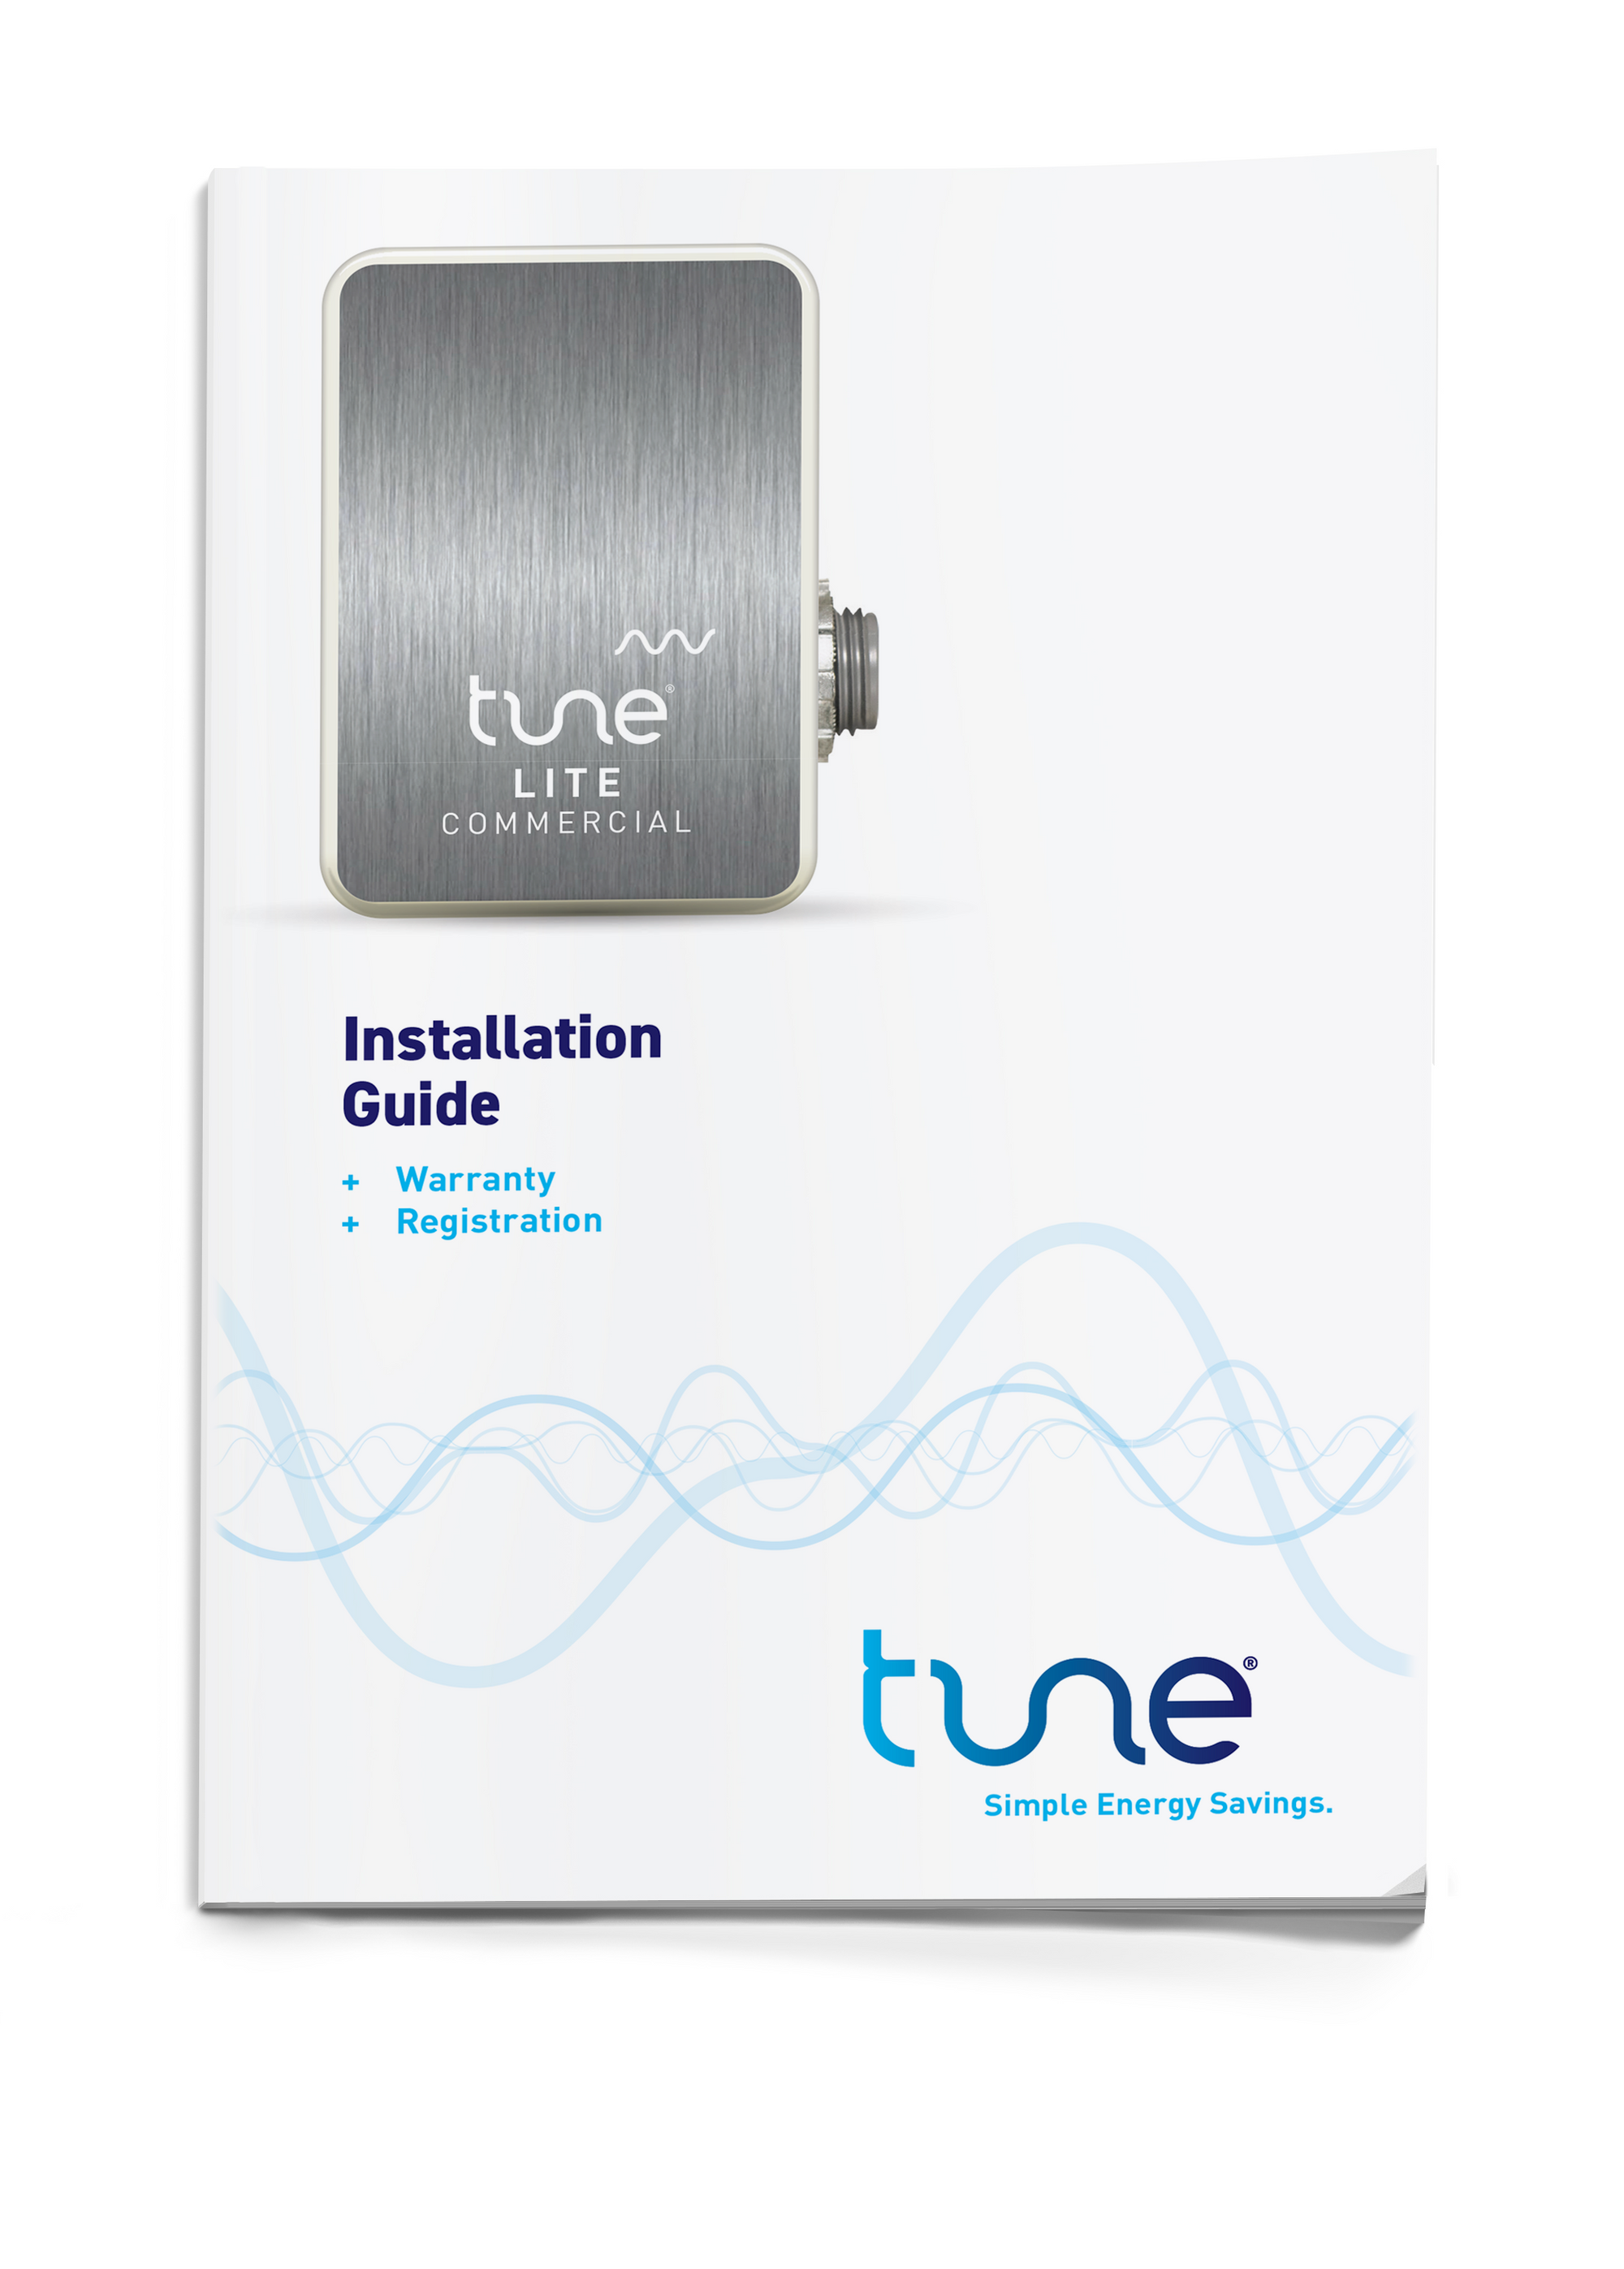 Tune Lite Commercial Installation Guide